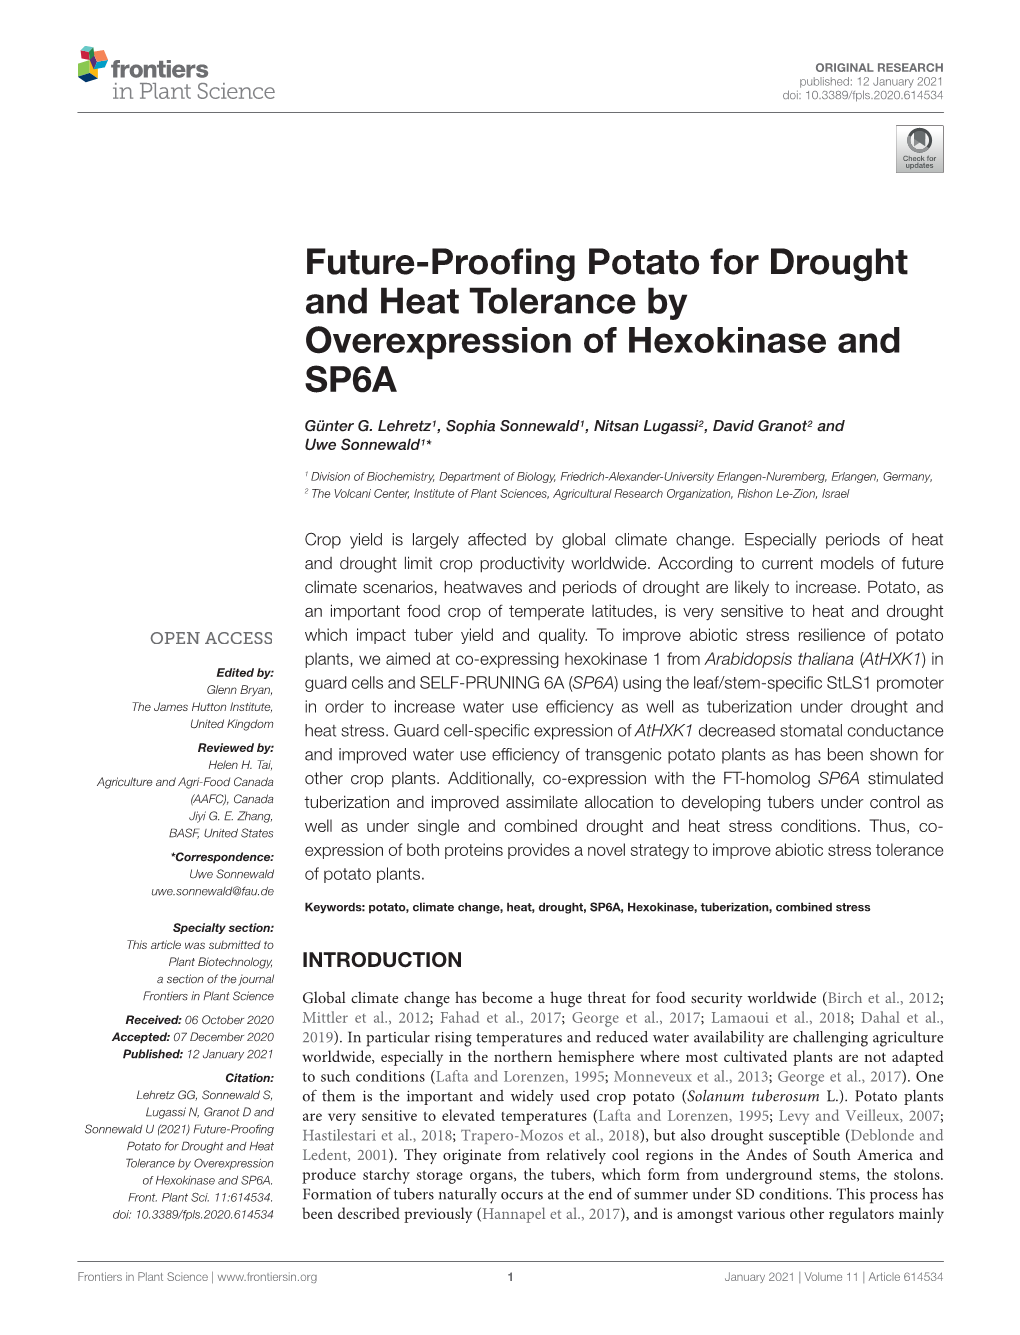 Future-Proofing Potato for Drought and Heat Tolerance by Overexpression of Hexokinase and SP6A